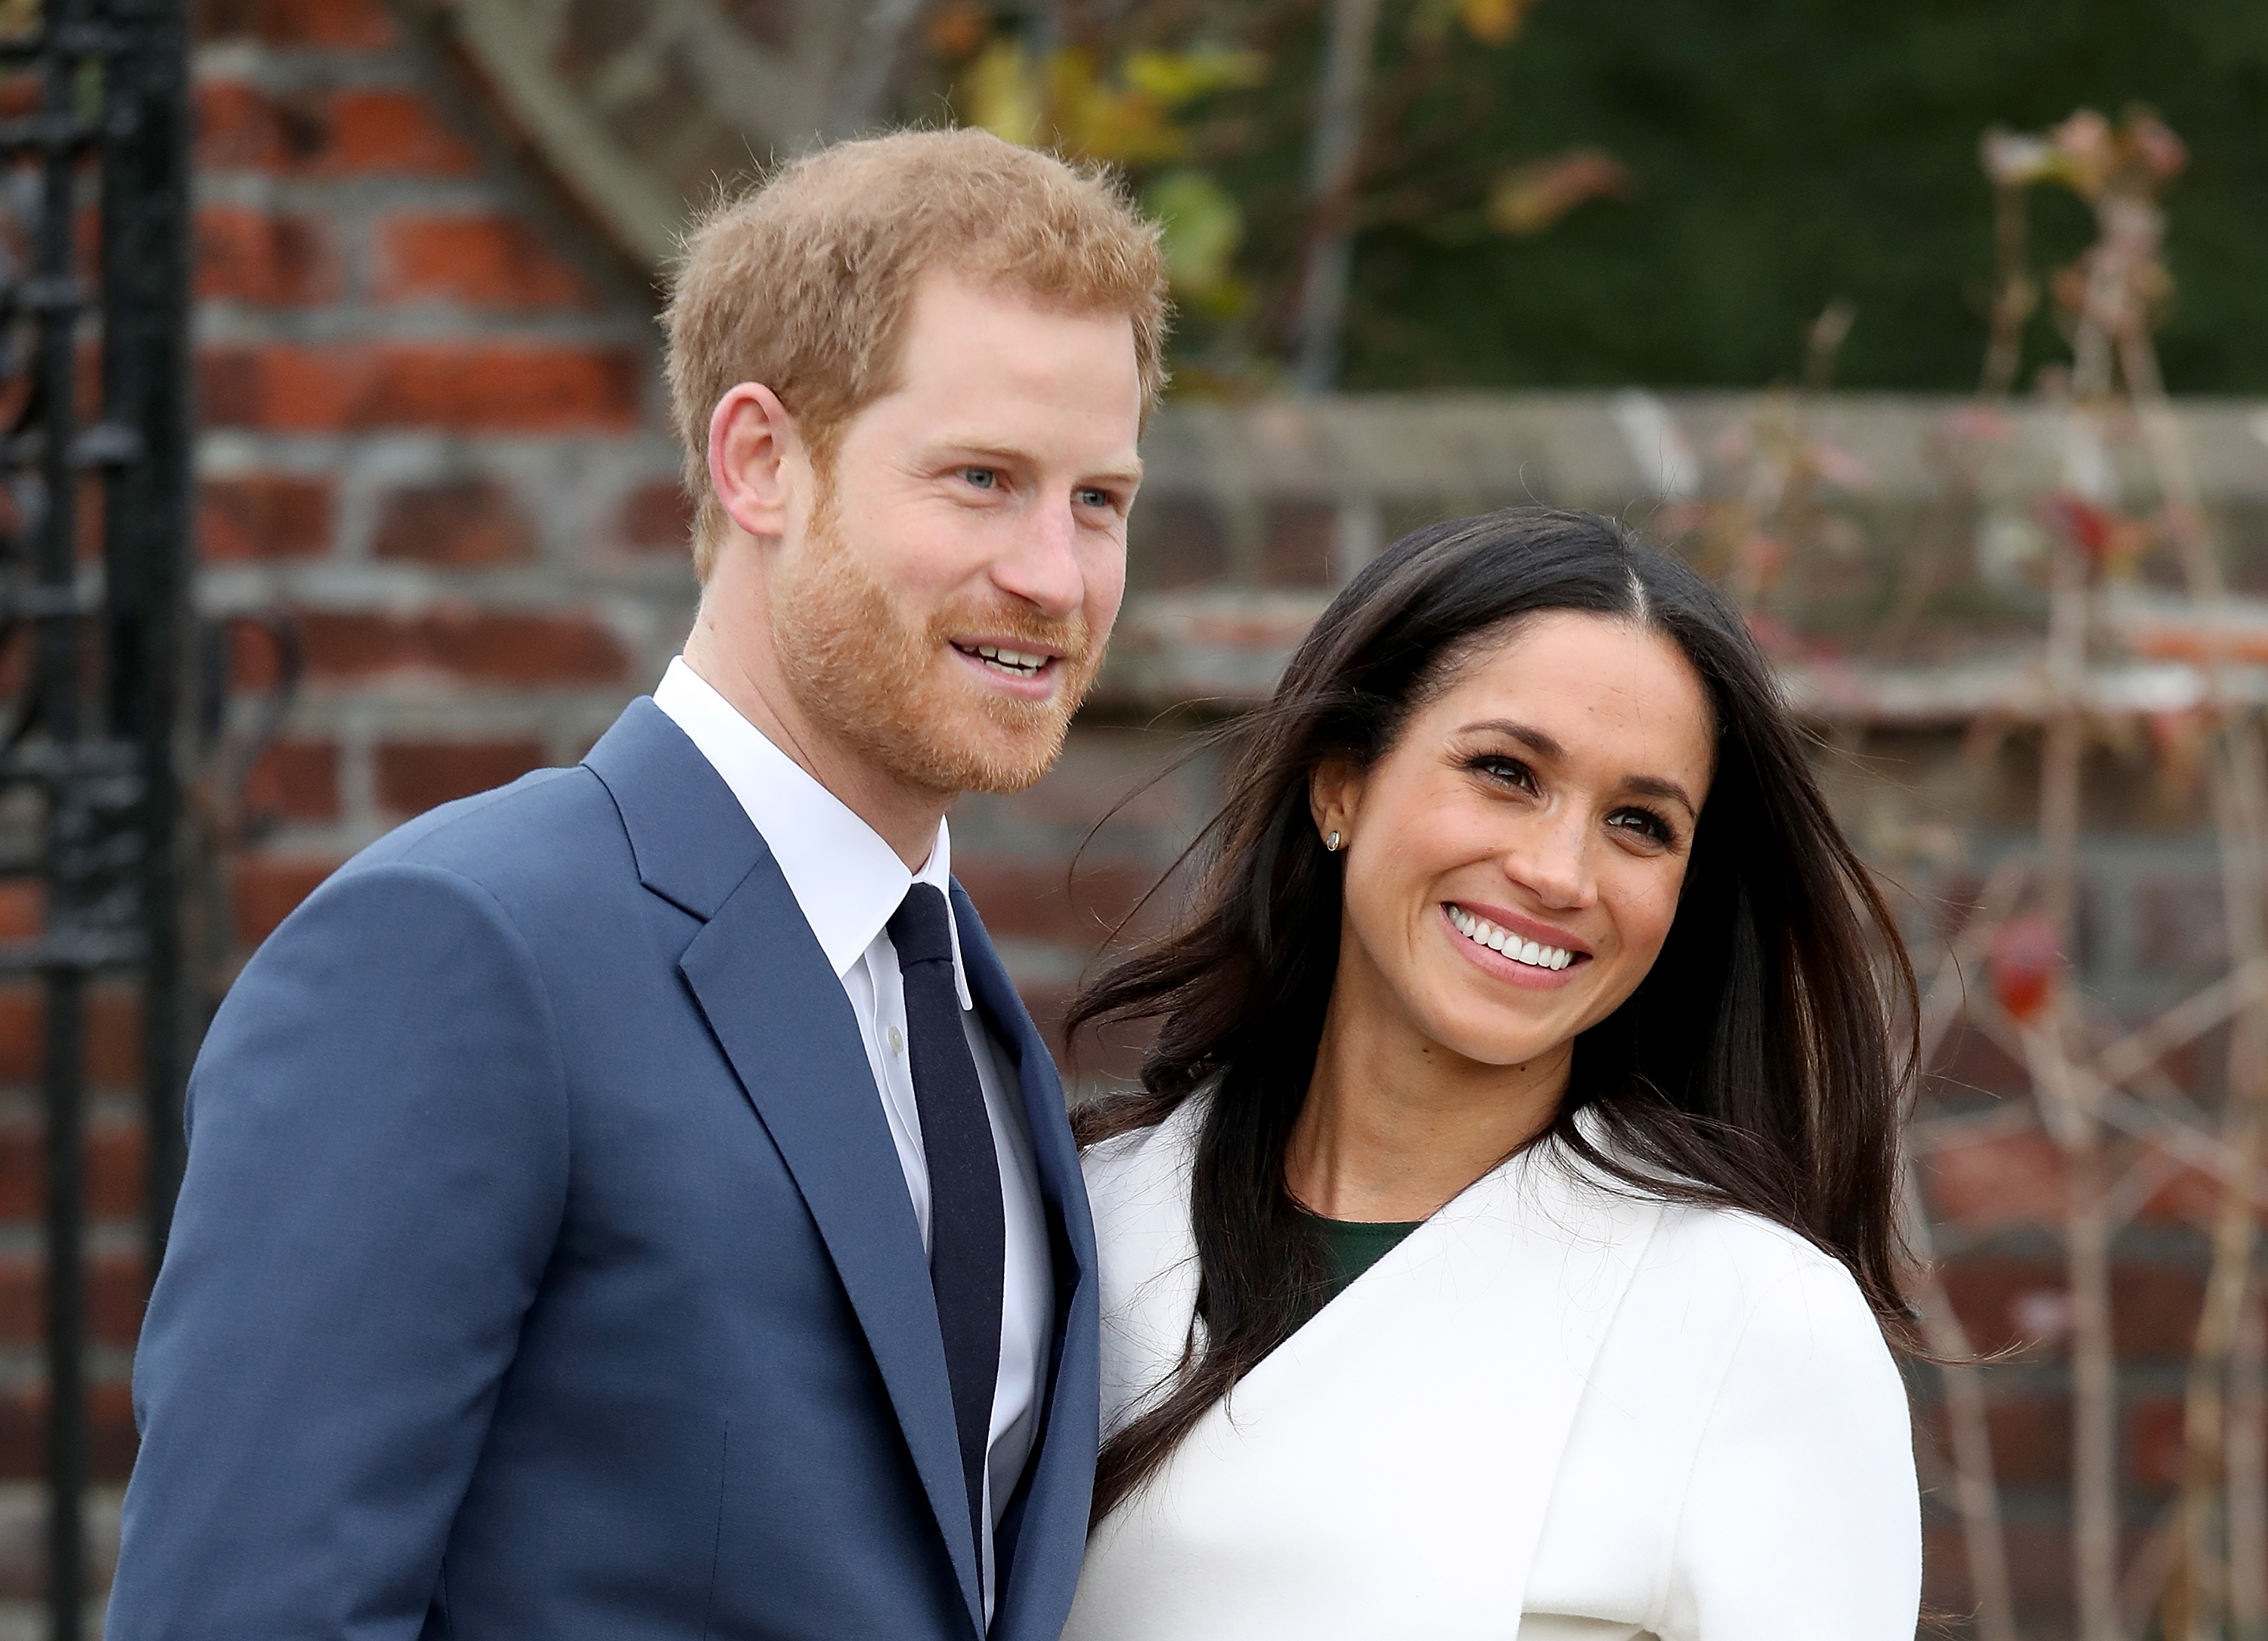 Prince Harry And Meghan Markle Have A Secret Wedding Gift List - Grazia